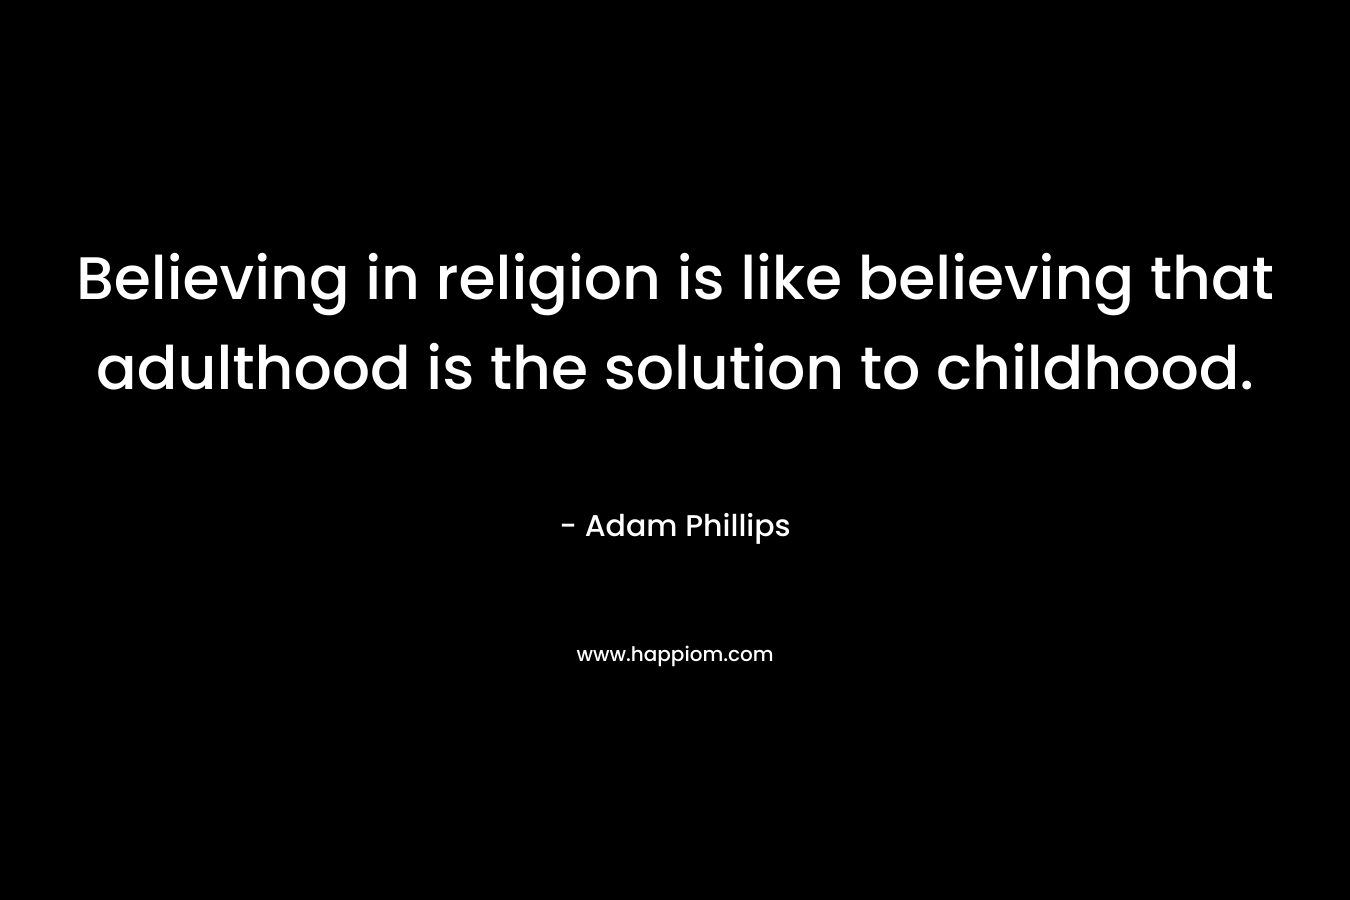 Believing in religion is like believing that adulthood is the solution to childhood.